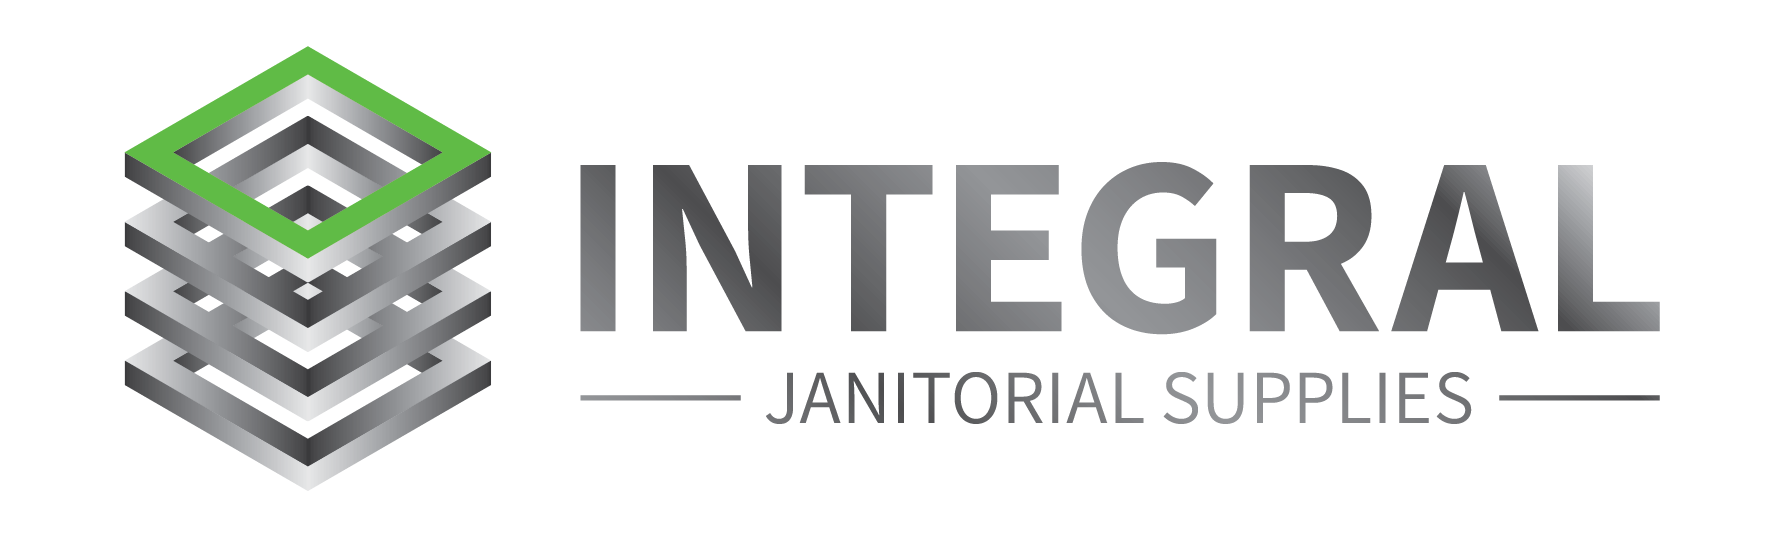 janitorial services Integral services group logo